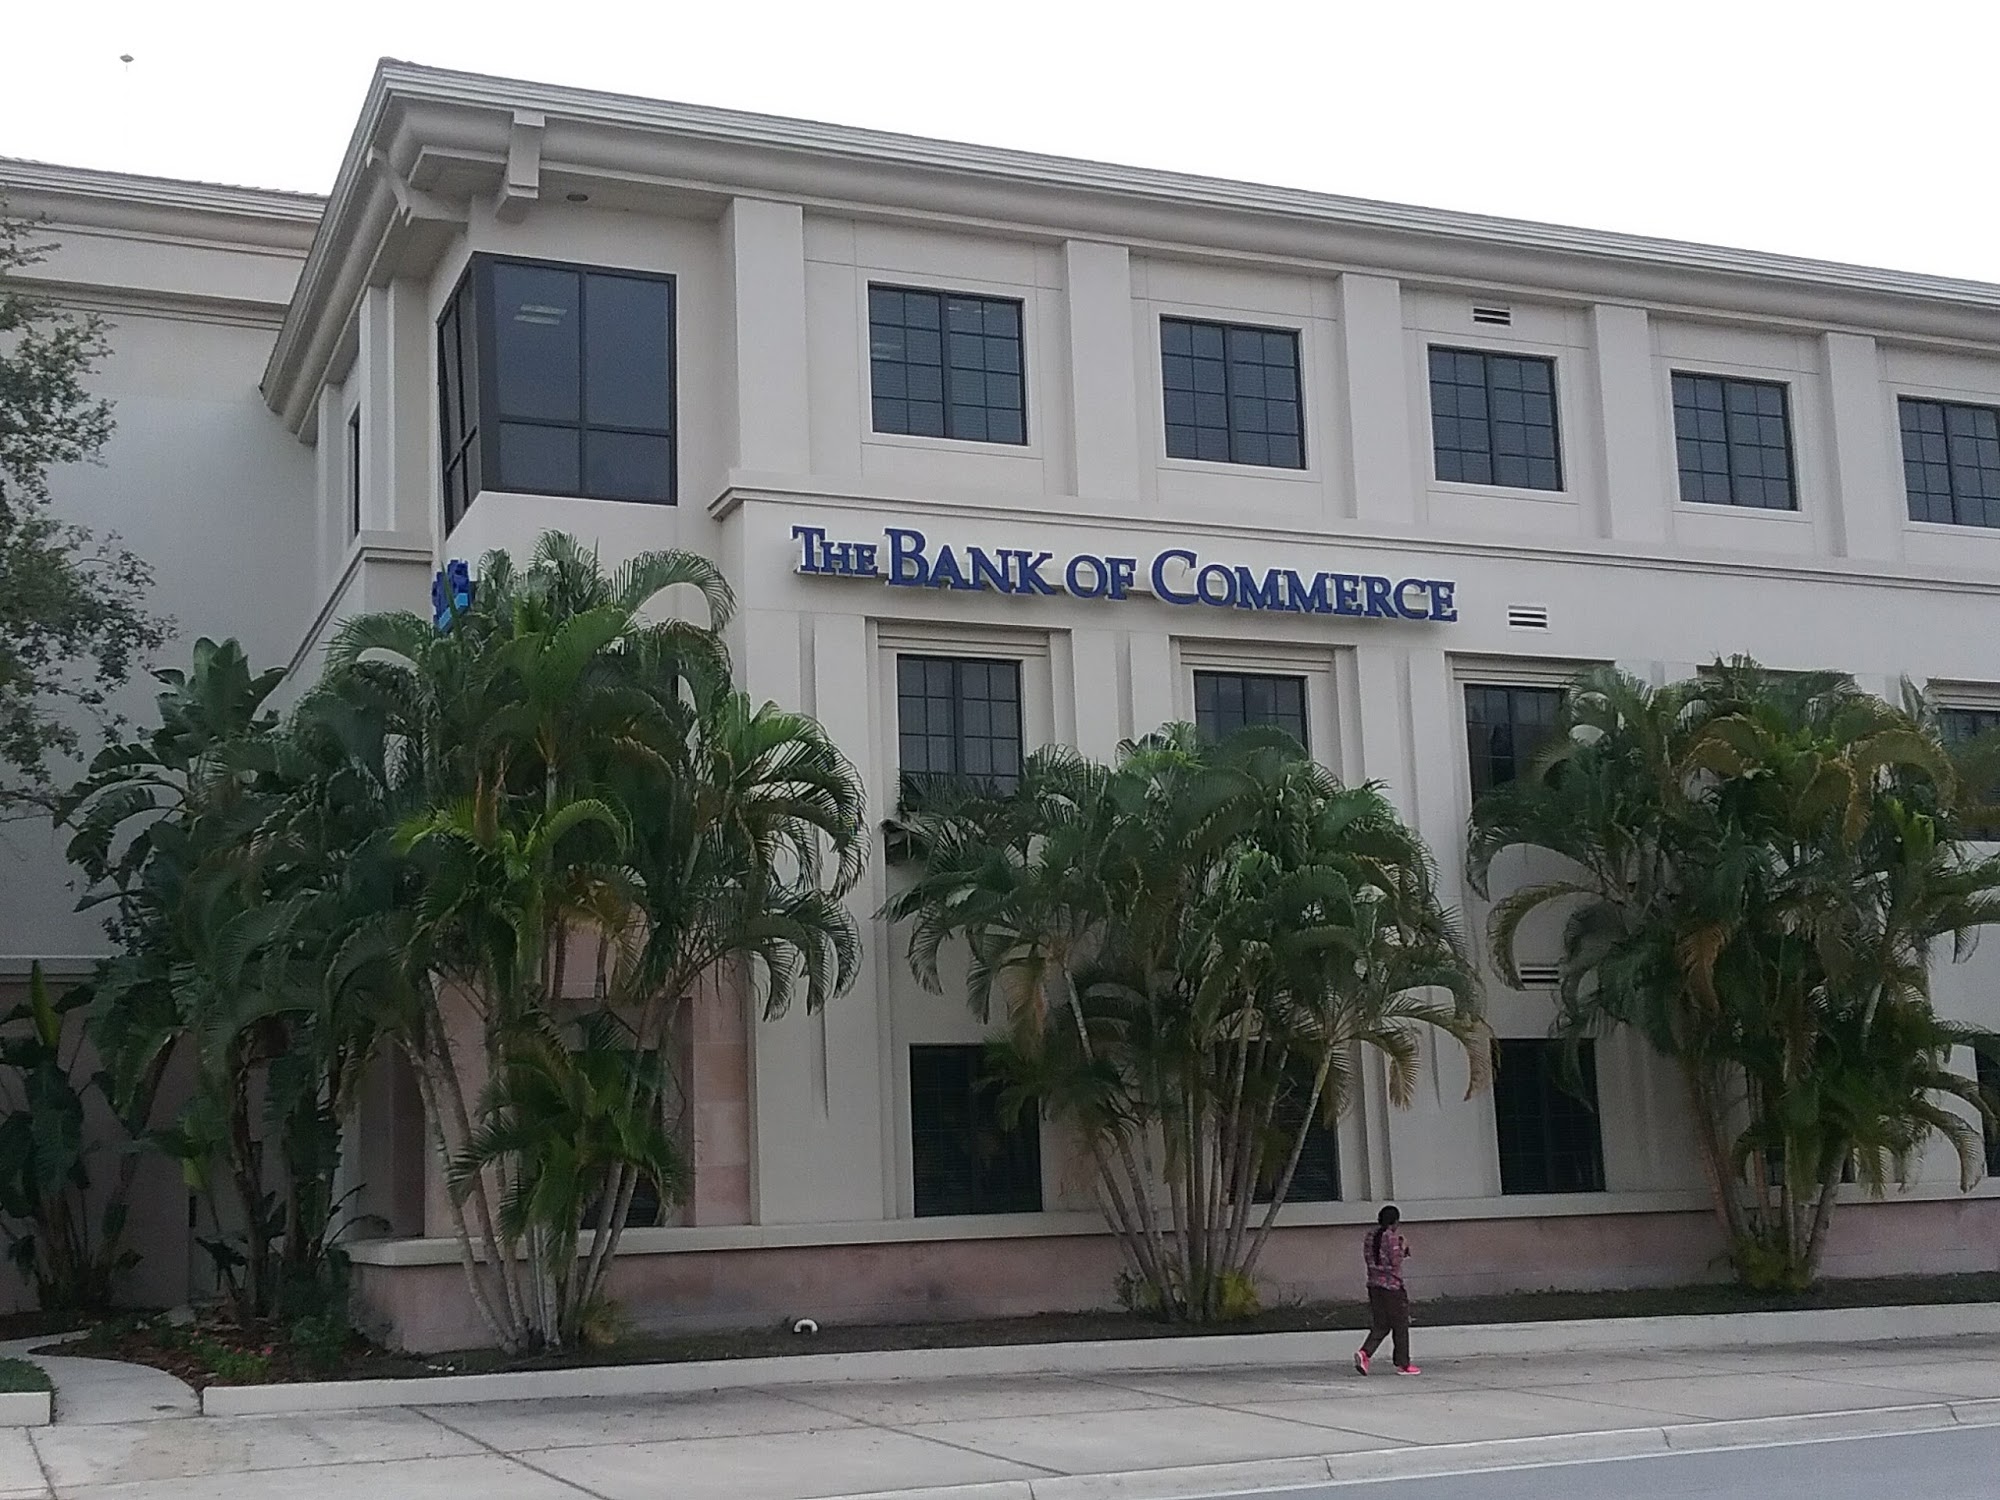 The Bank of Commerce